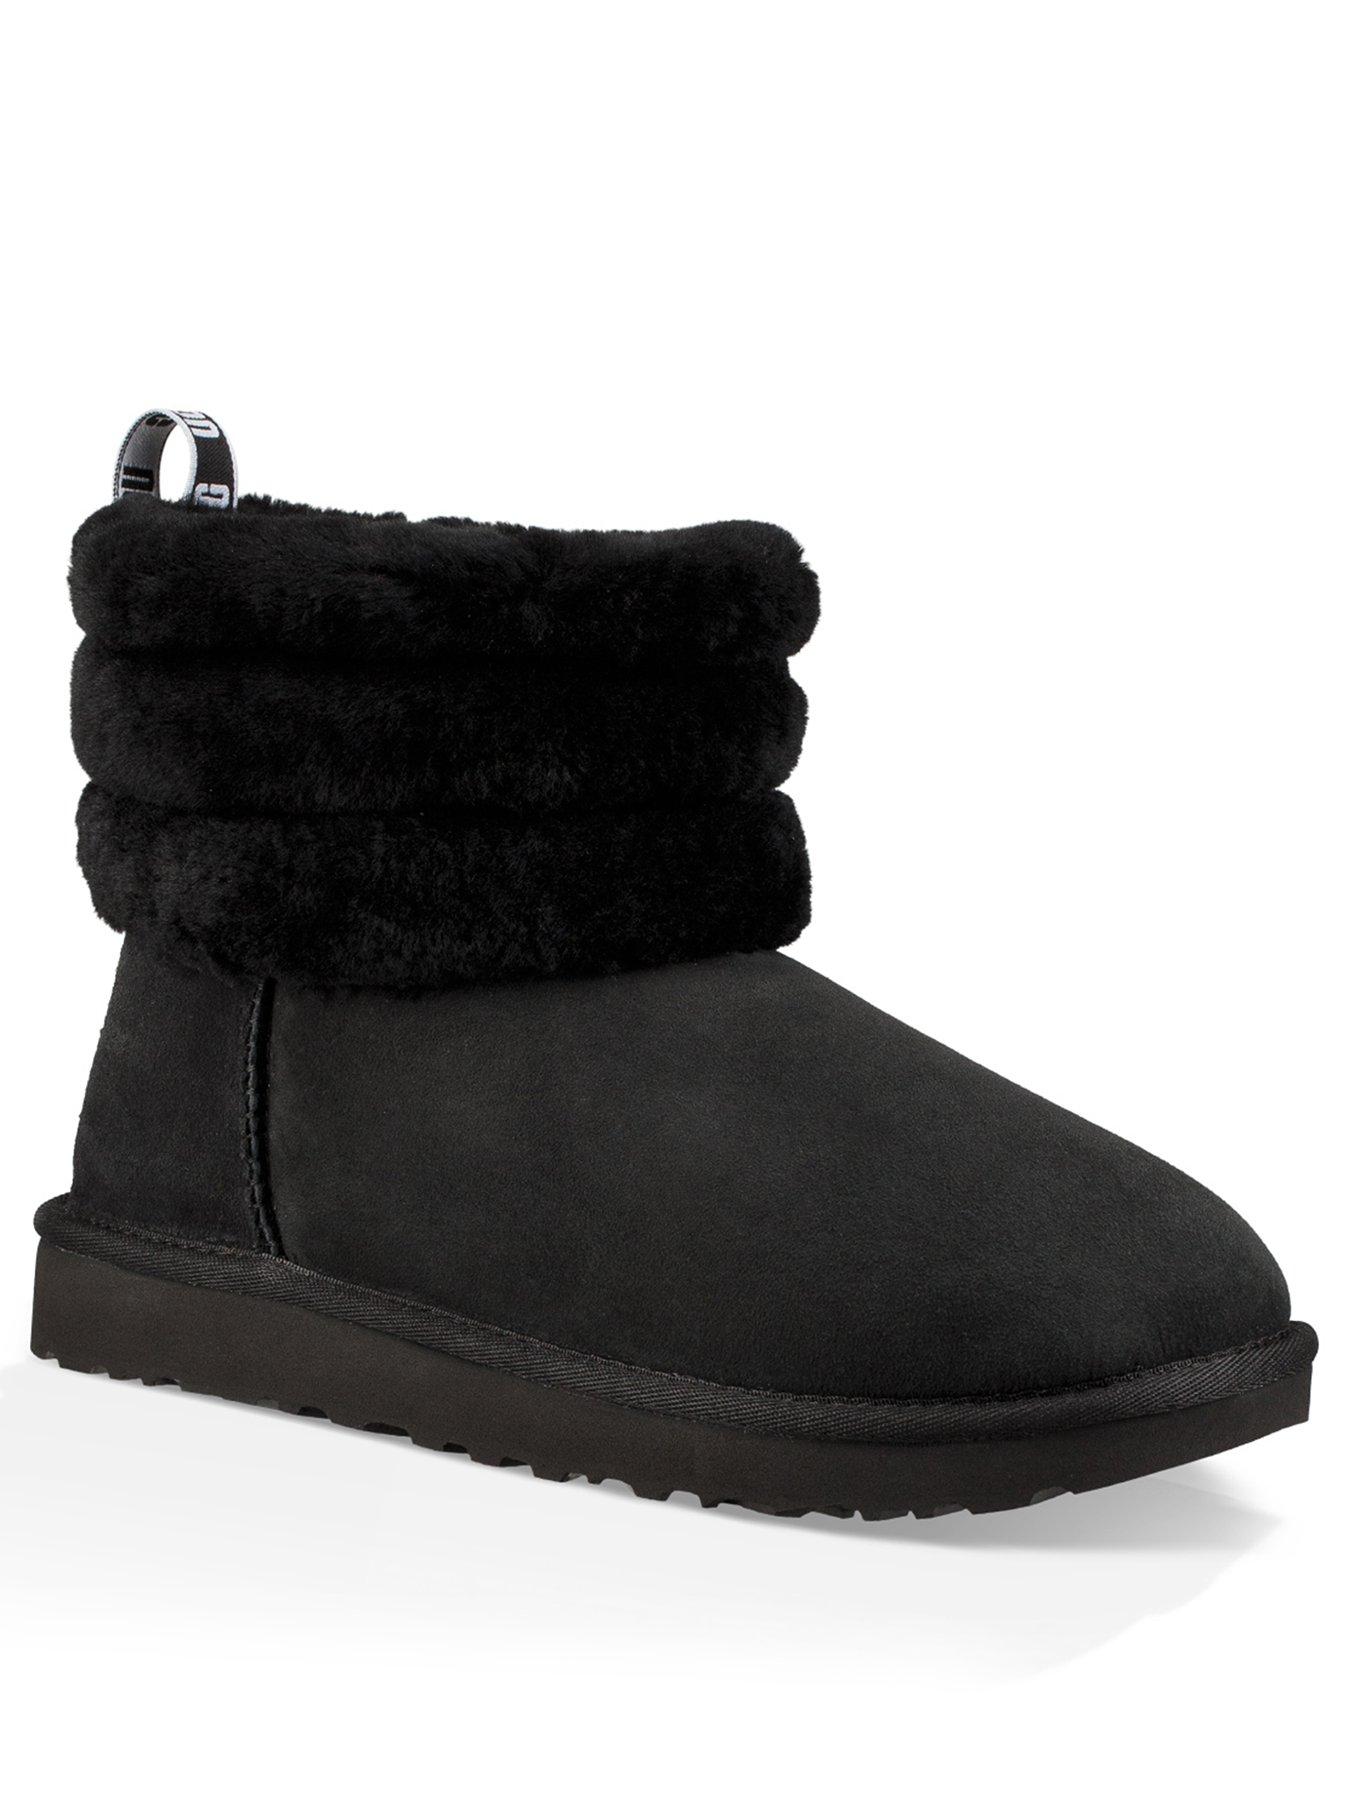 casual ugg boots